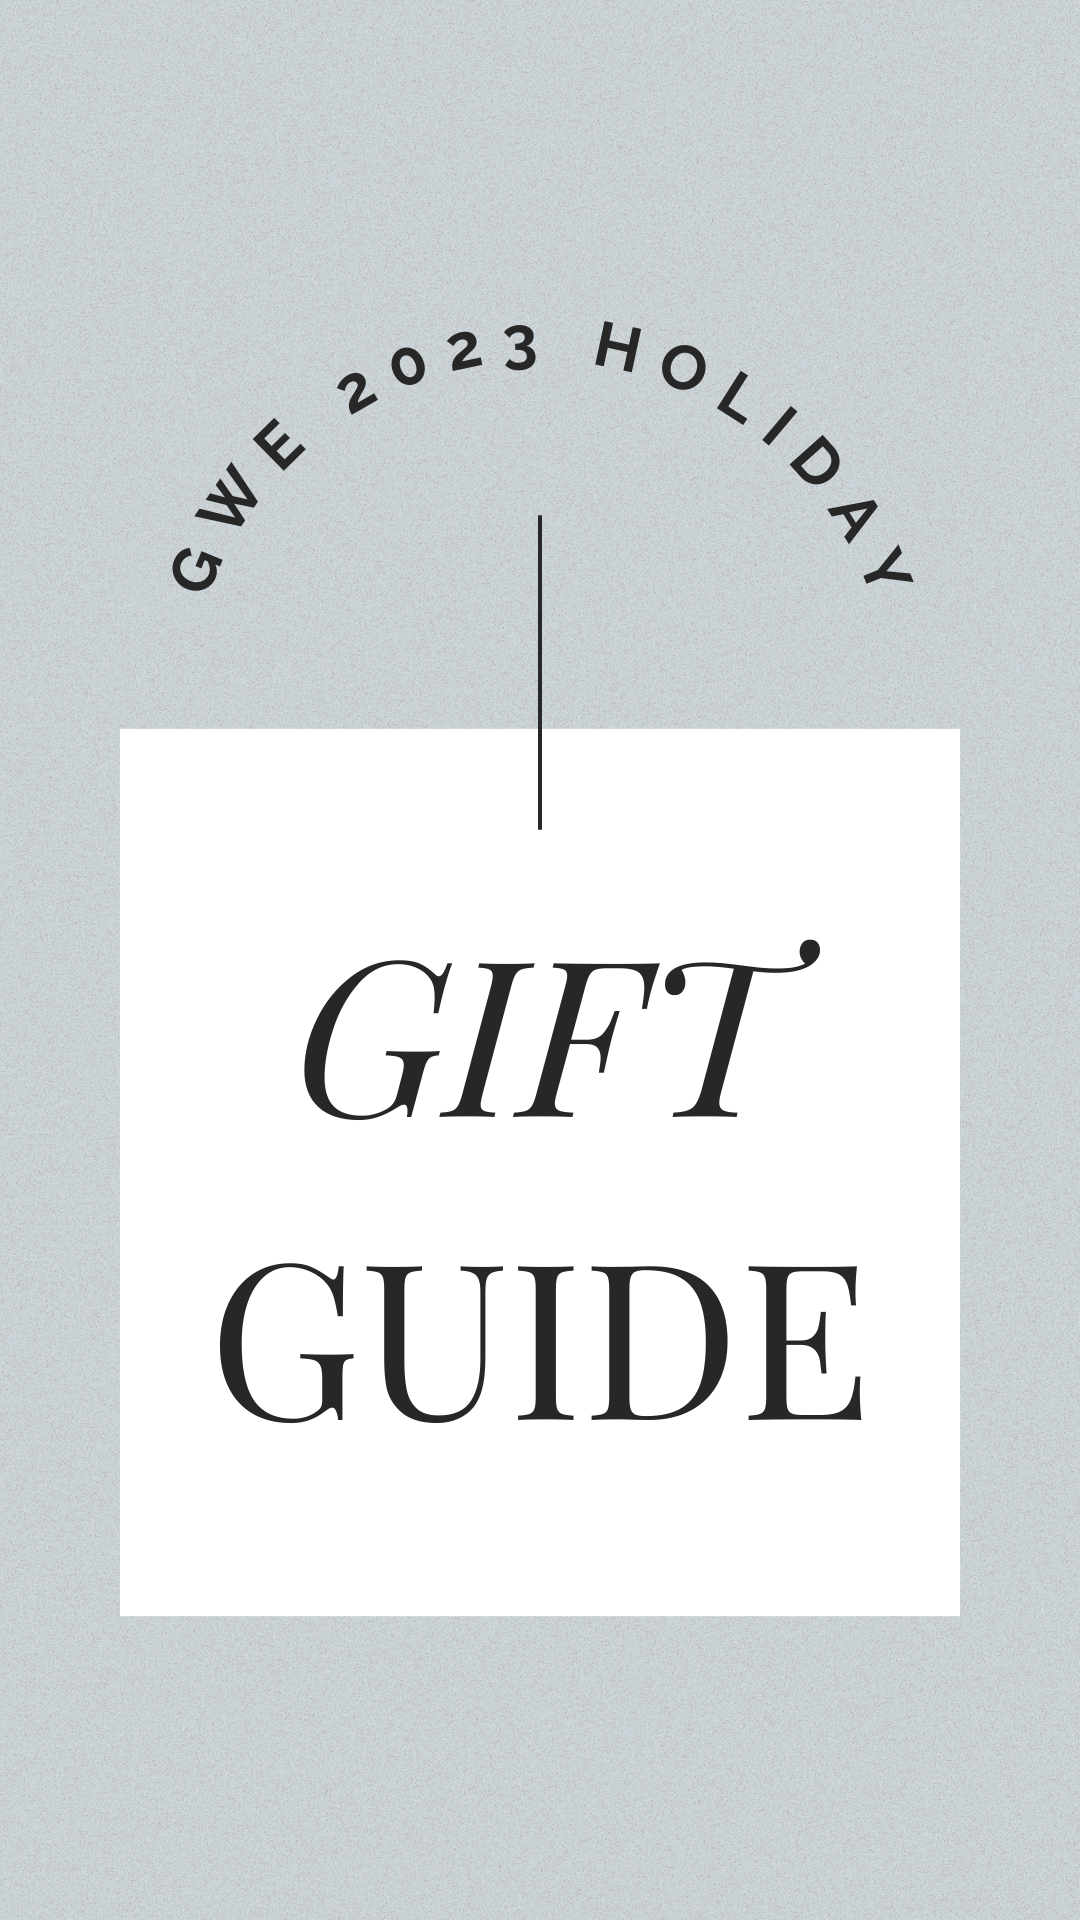 https://eadn-wc05-6775084.nxedge.io/cdn/wp-content/uploads/2023-Holiday-Gift-Guide.png